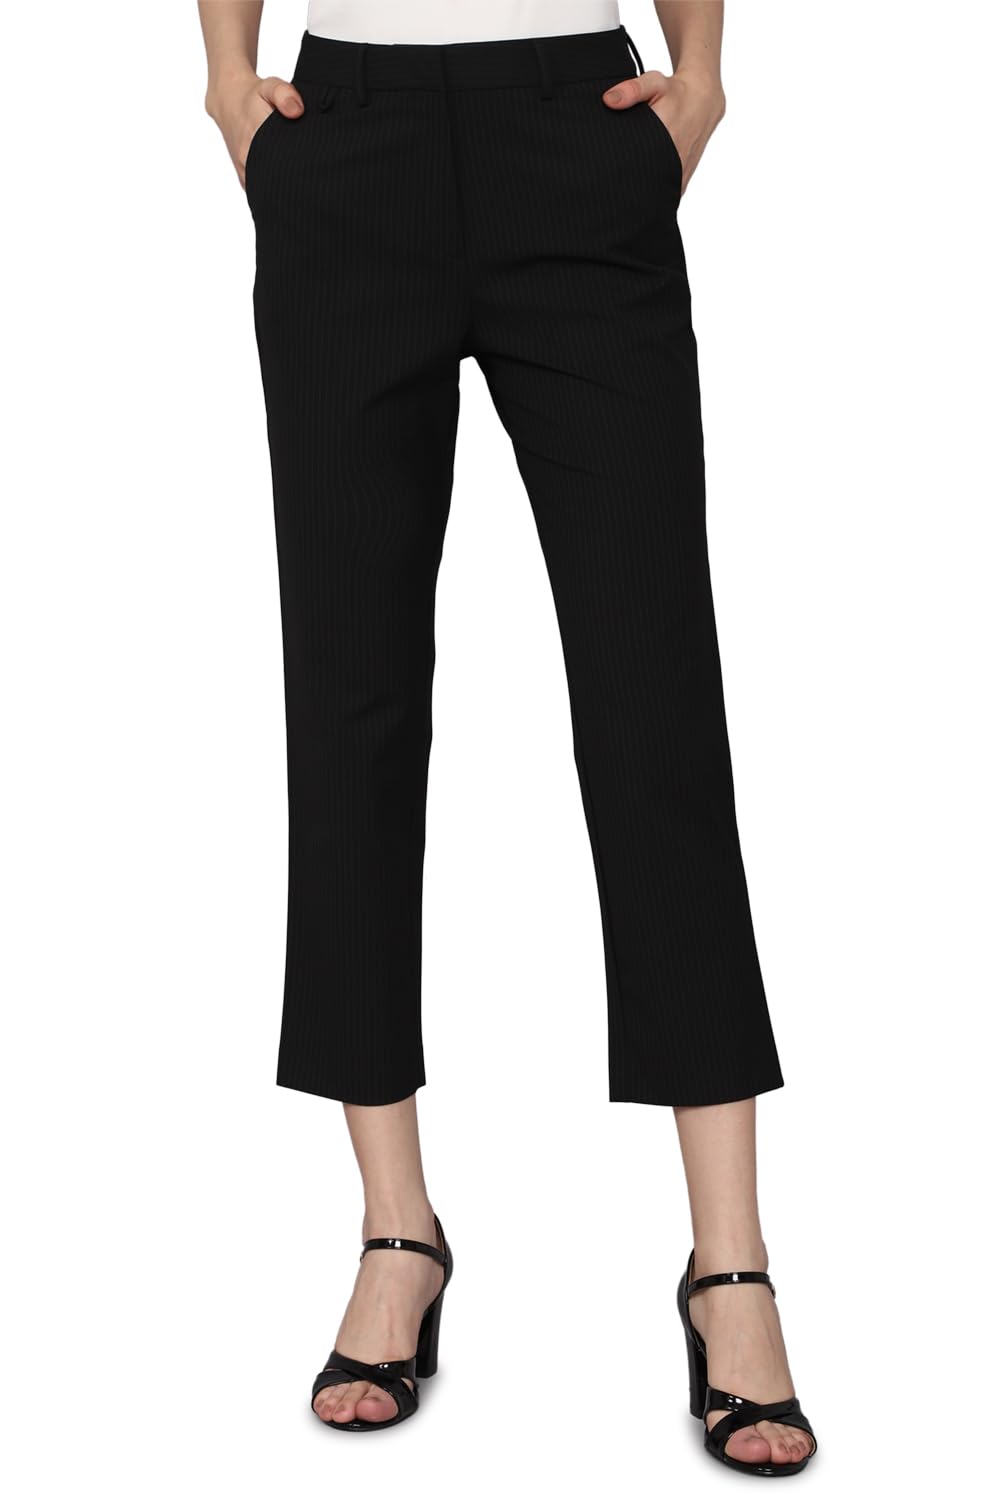 Buy Women Black Regular Fit Solid Business Casual Trousers Online - 218580  | Allen Solly